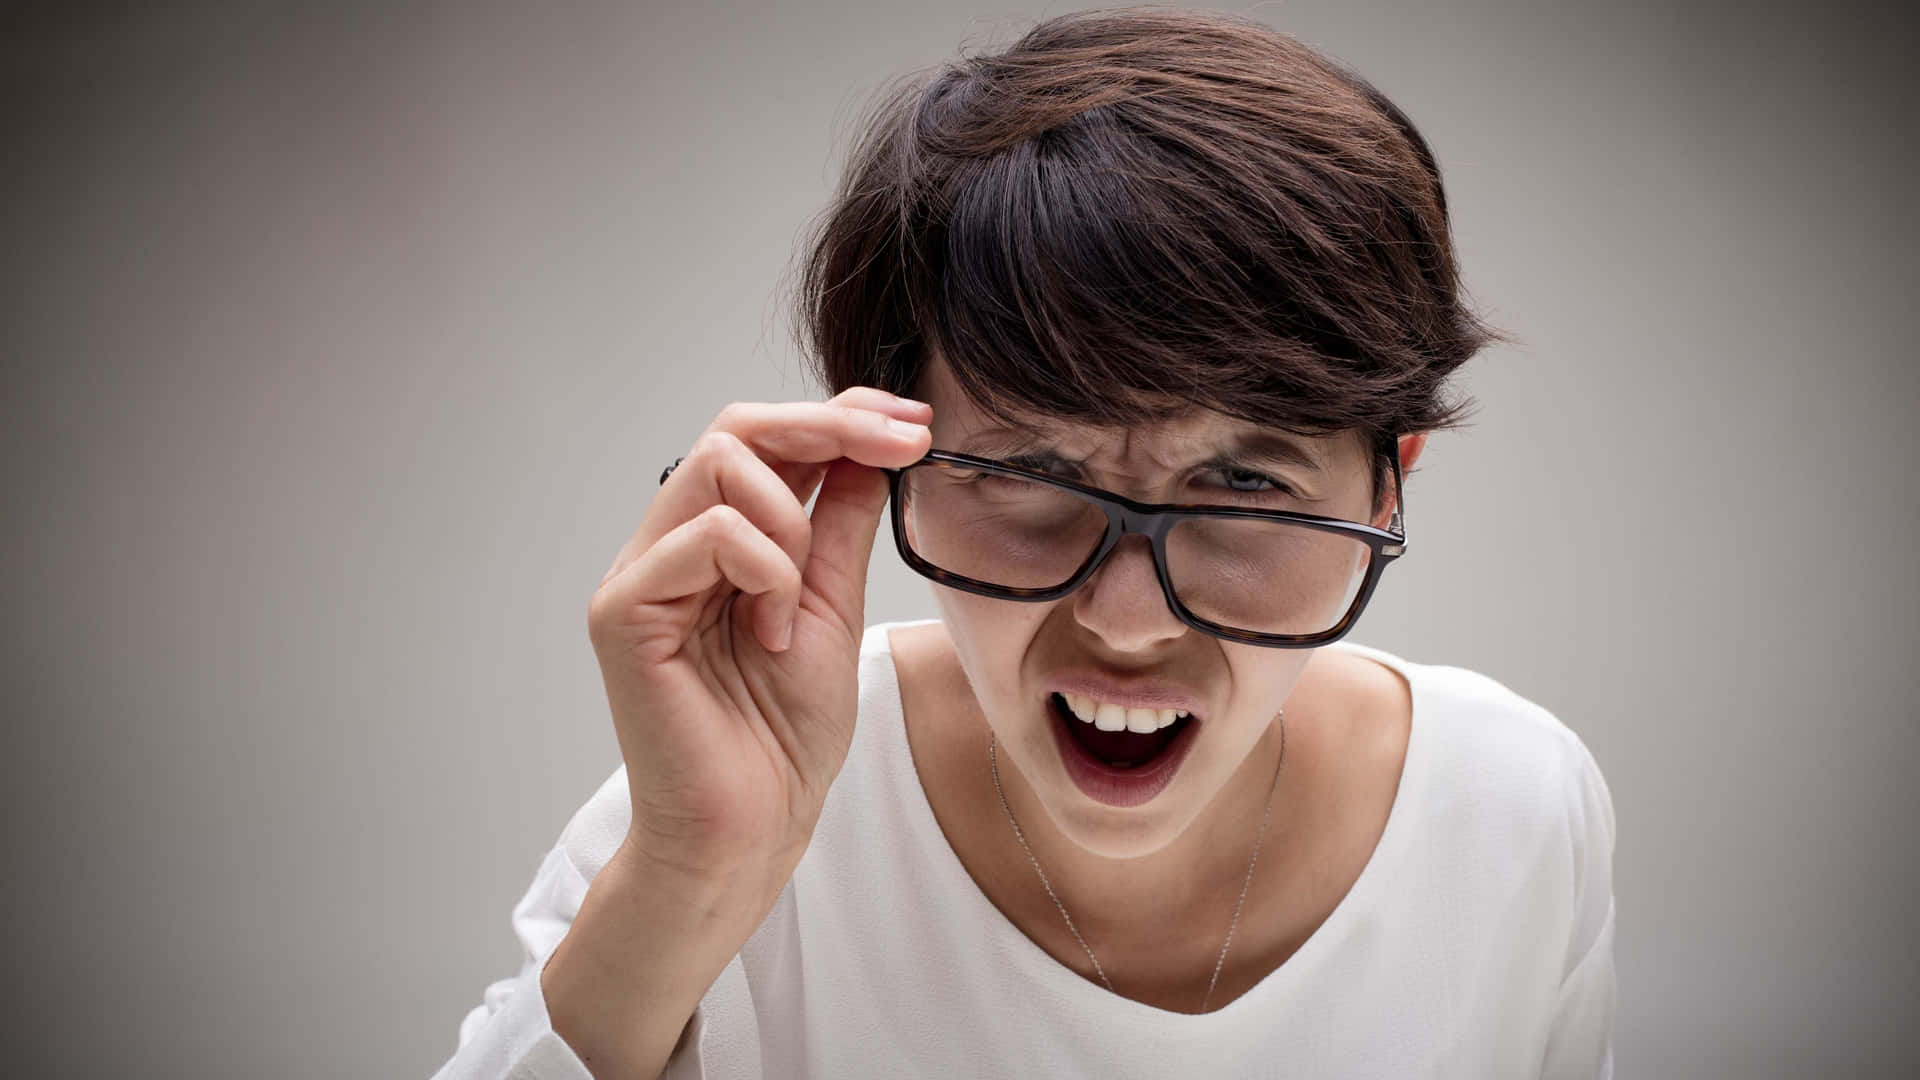 Squinting Person Holding Glasses Wallpaper